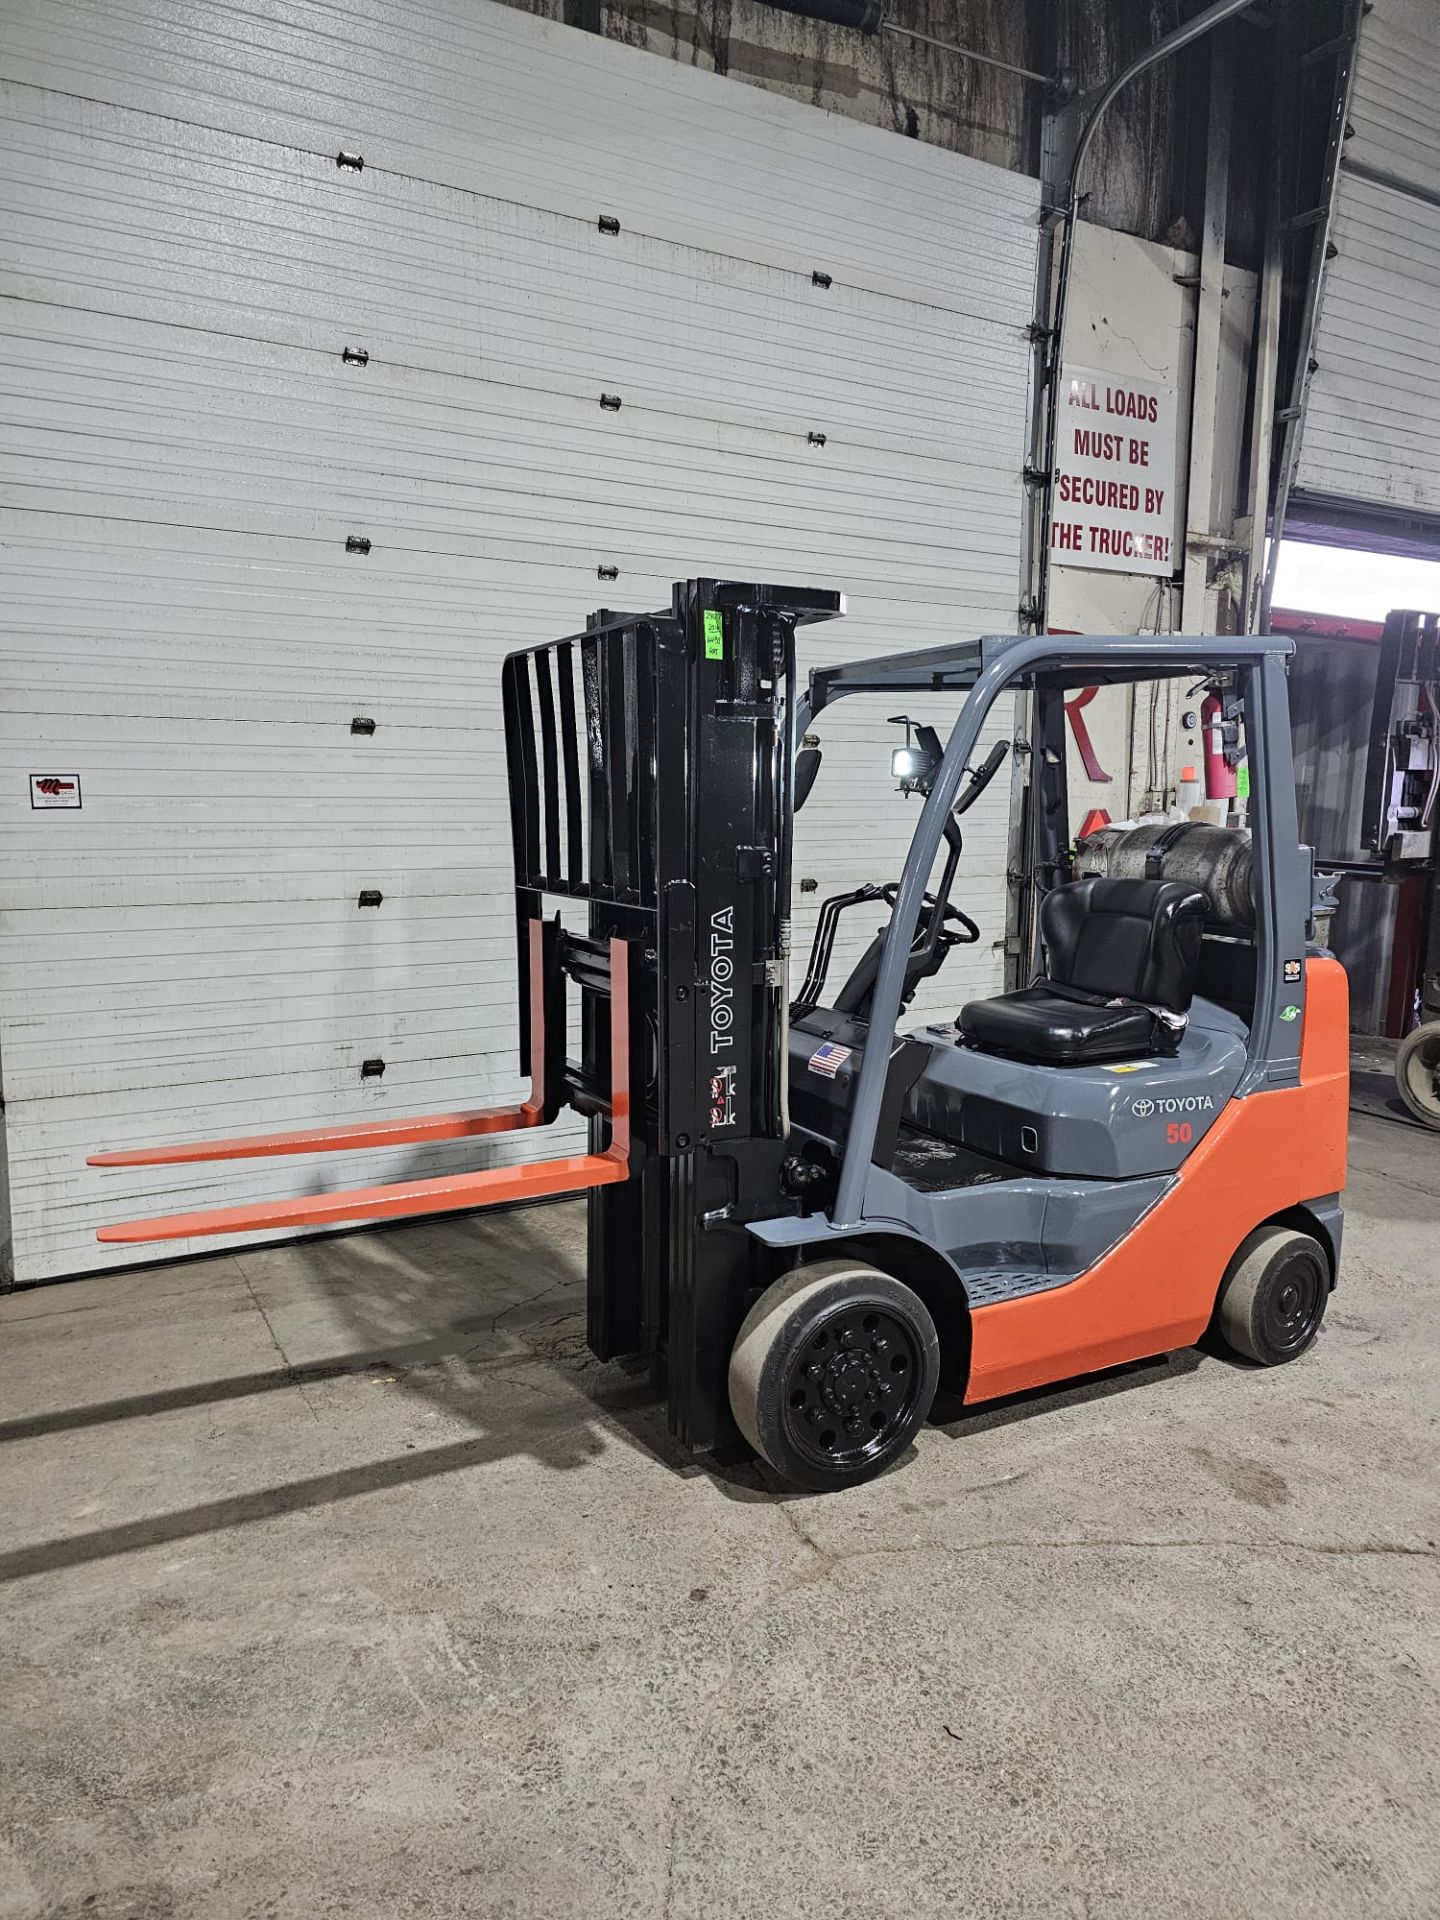 2016 TOYOTA 5,000lbs Capacity LPG (Propane) Forklift with sideshift with 3-STAGE MAST (no propane - Image 3 of 5